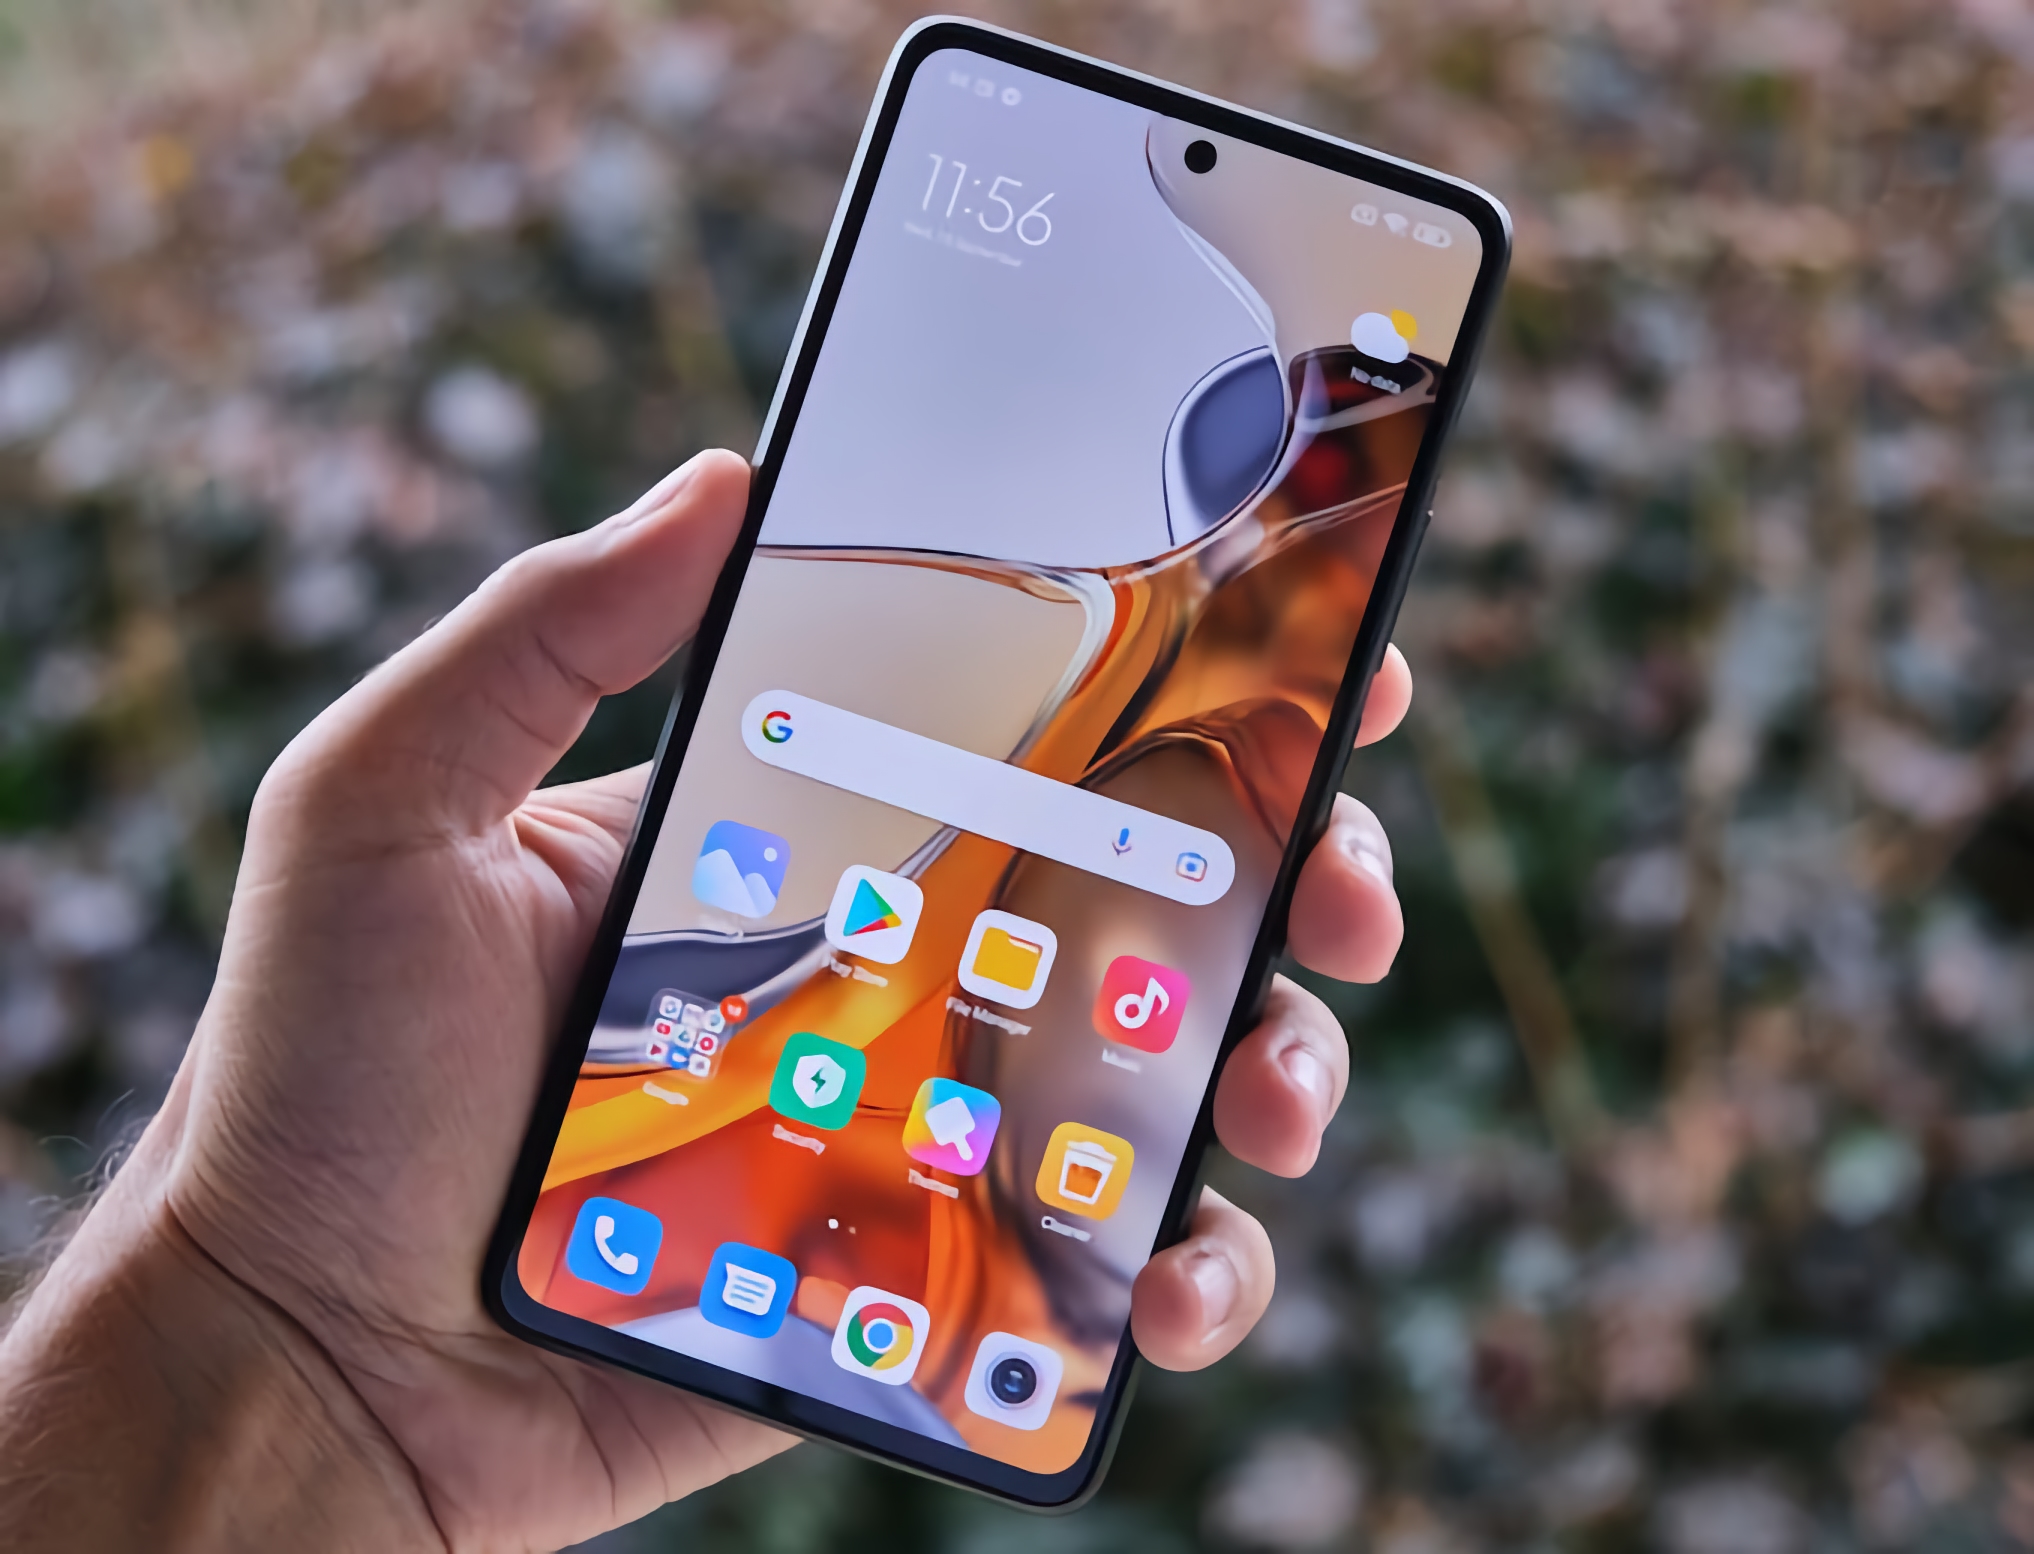 At the level of iPhone 12 Pro and Galaxy S20 Ultra: DxOMark specialists tested the screen of Xiaomi 11T Pro